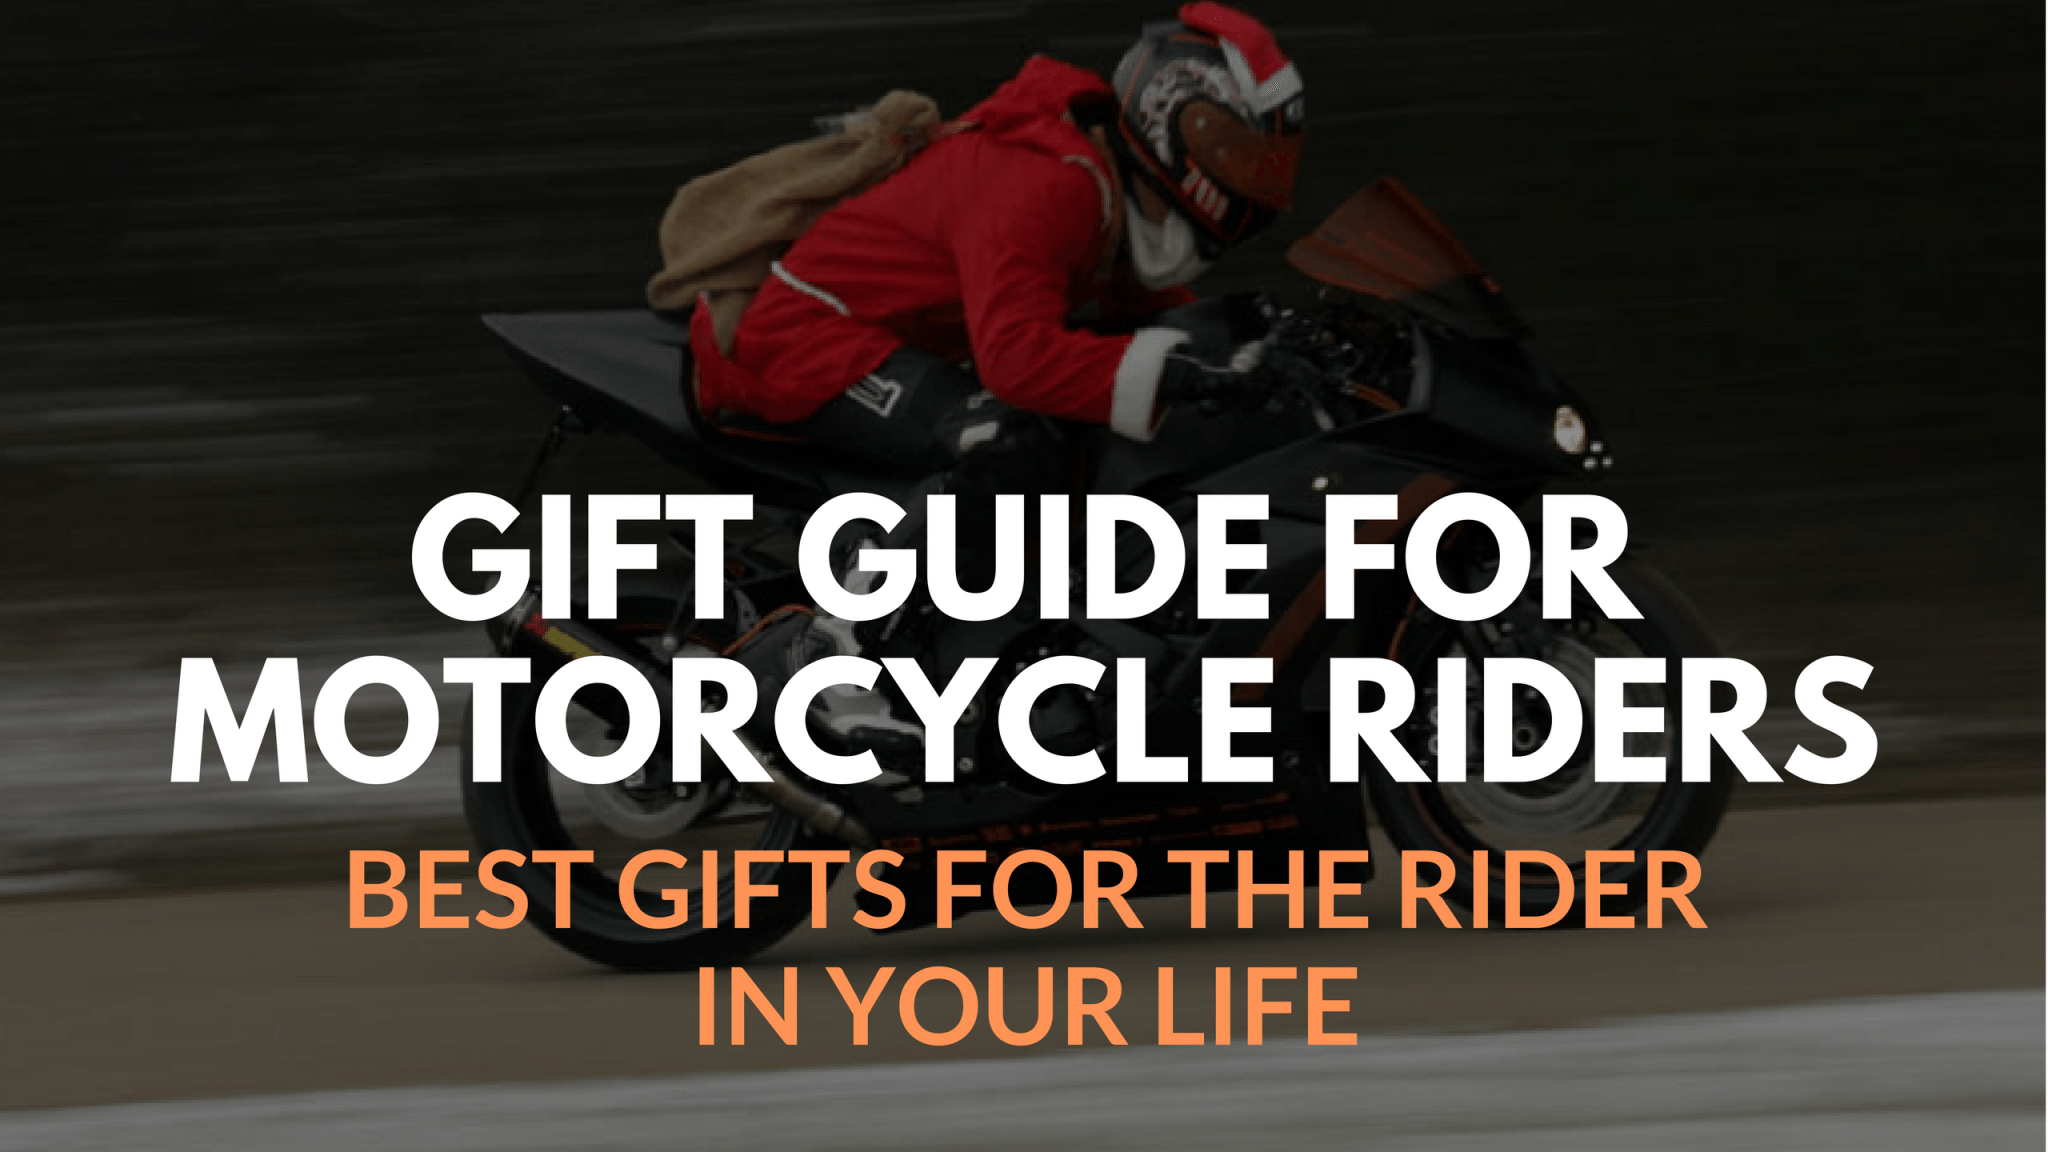 Gift Guide for Motorcycle Riders